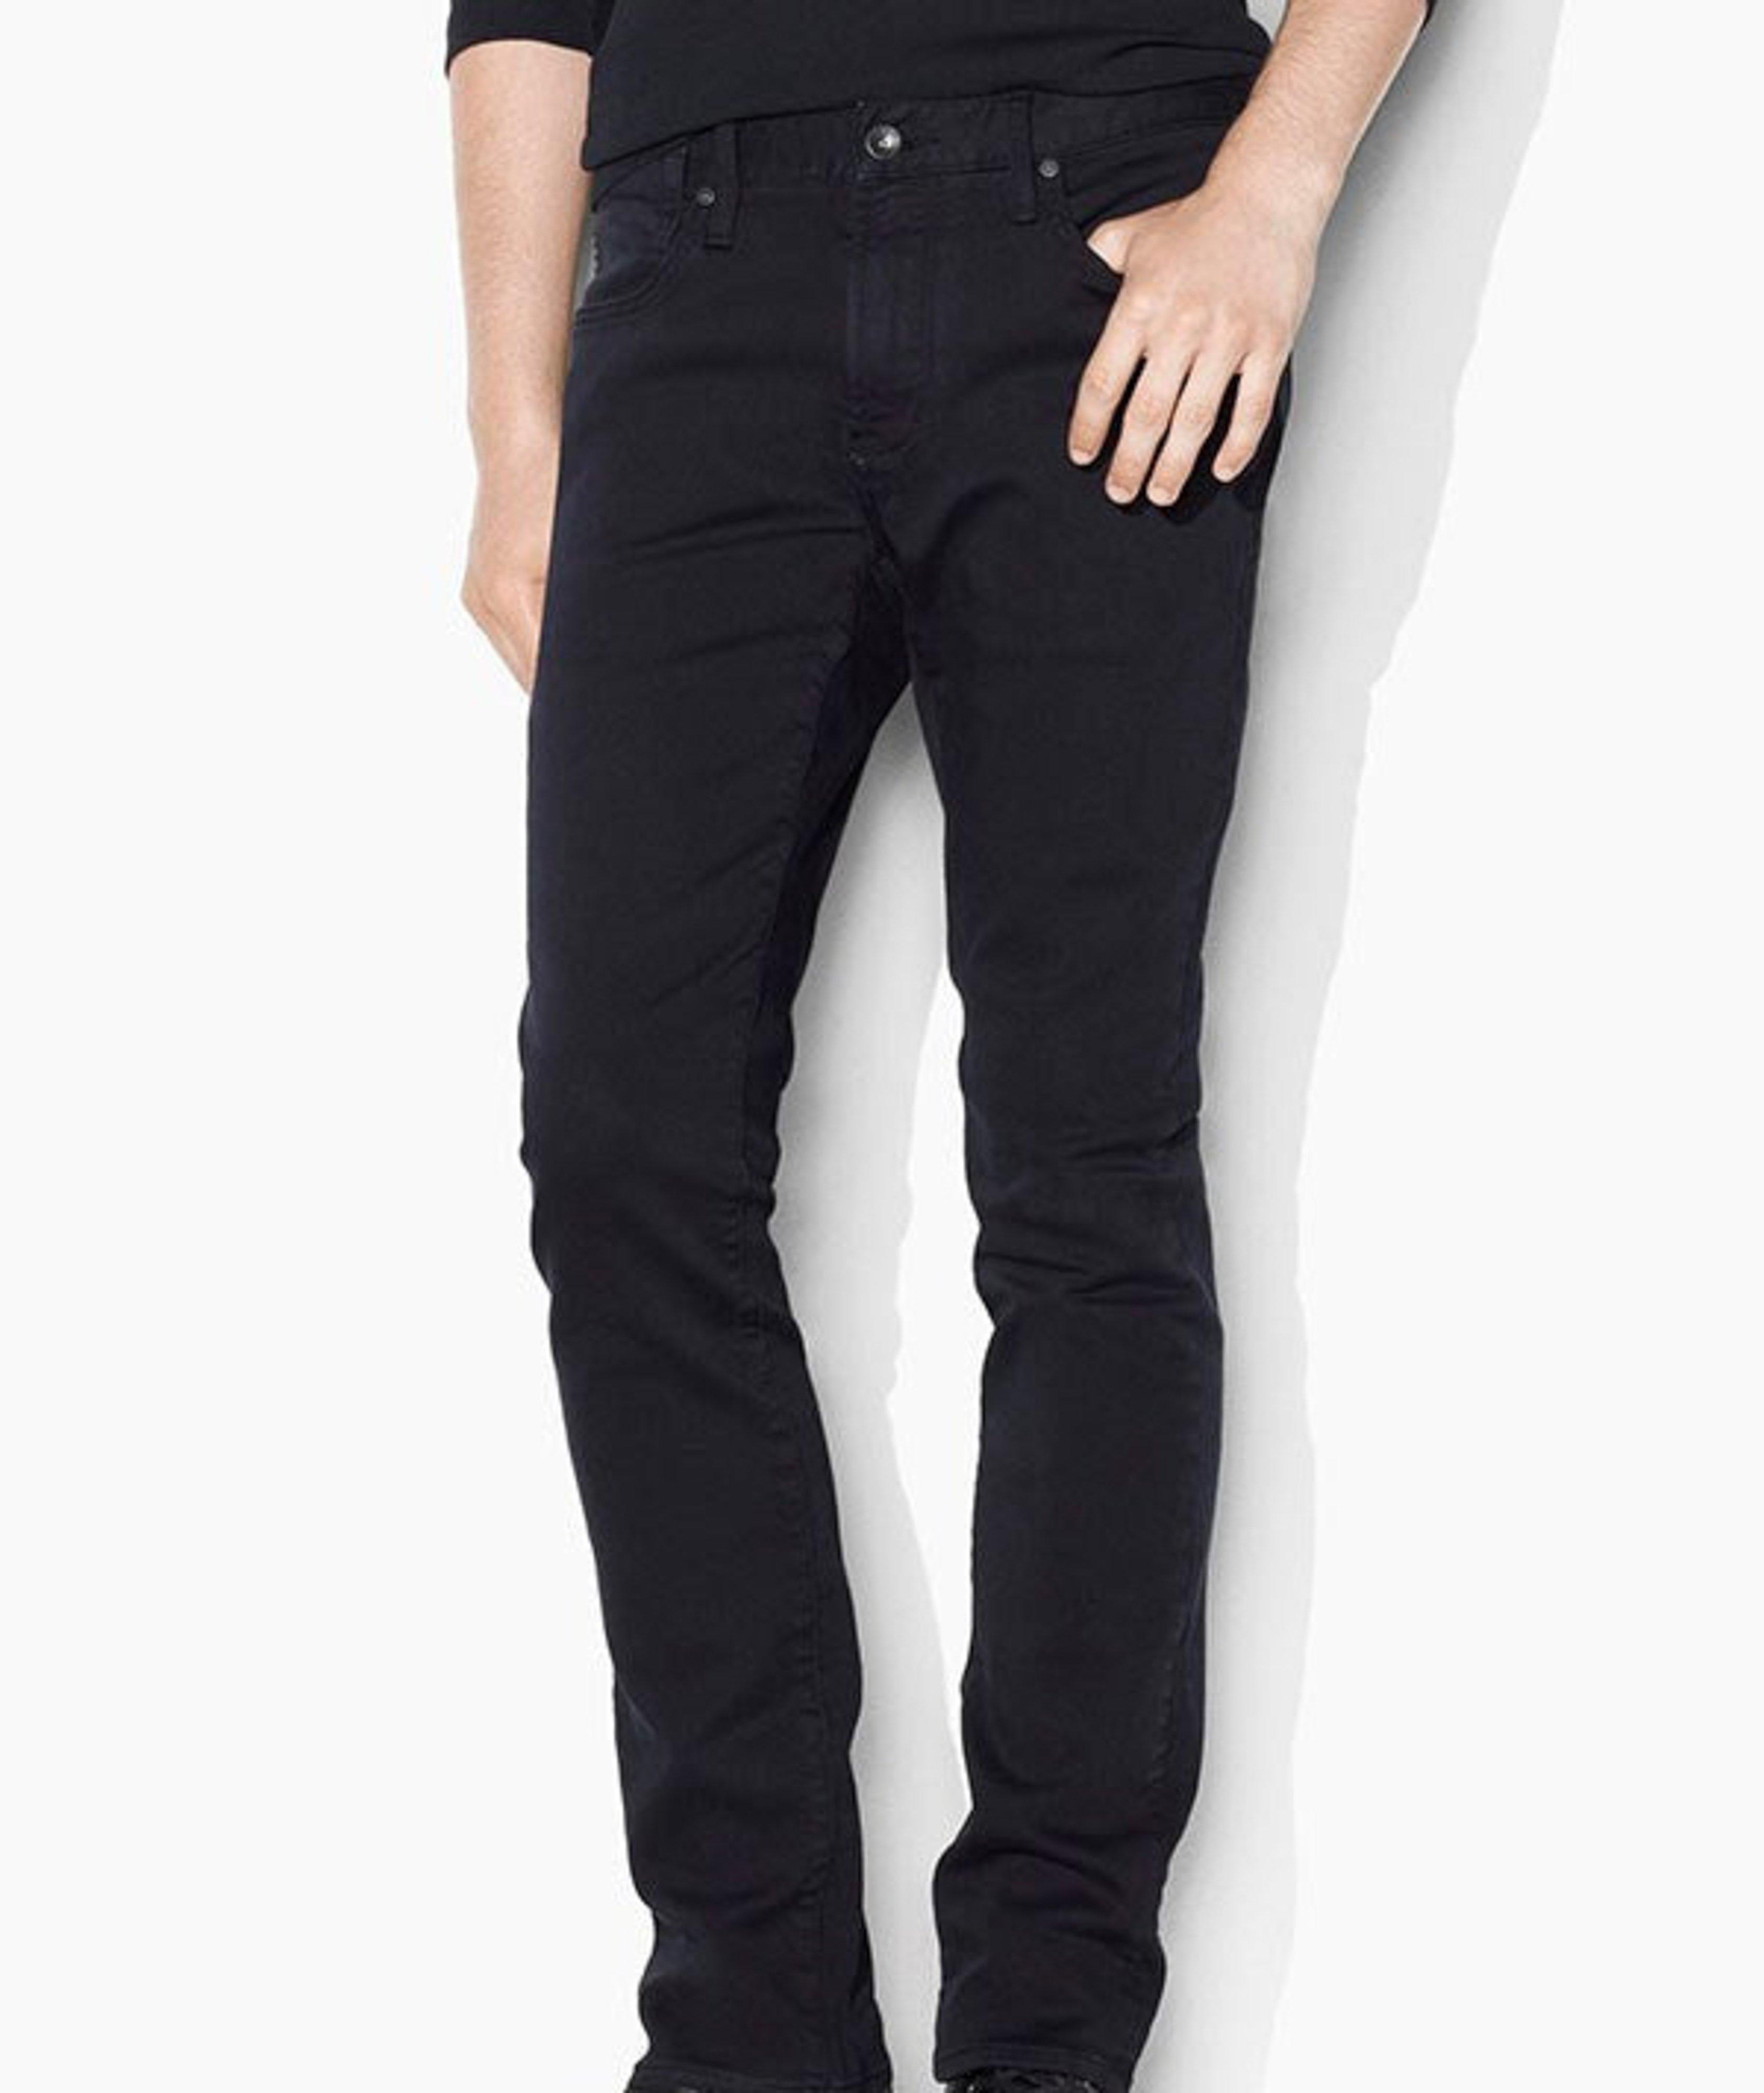 Bowery Cotton-Blend Jeans image 0